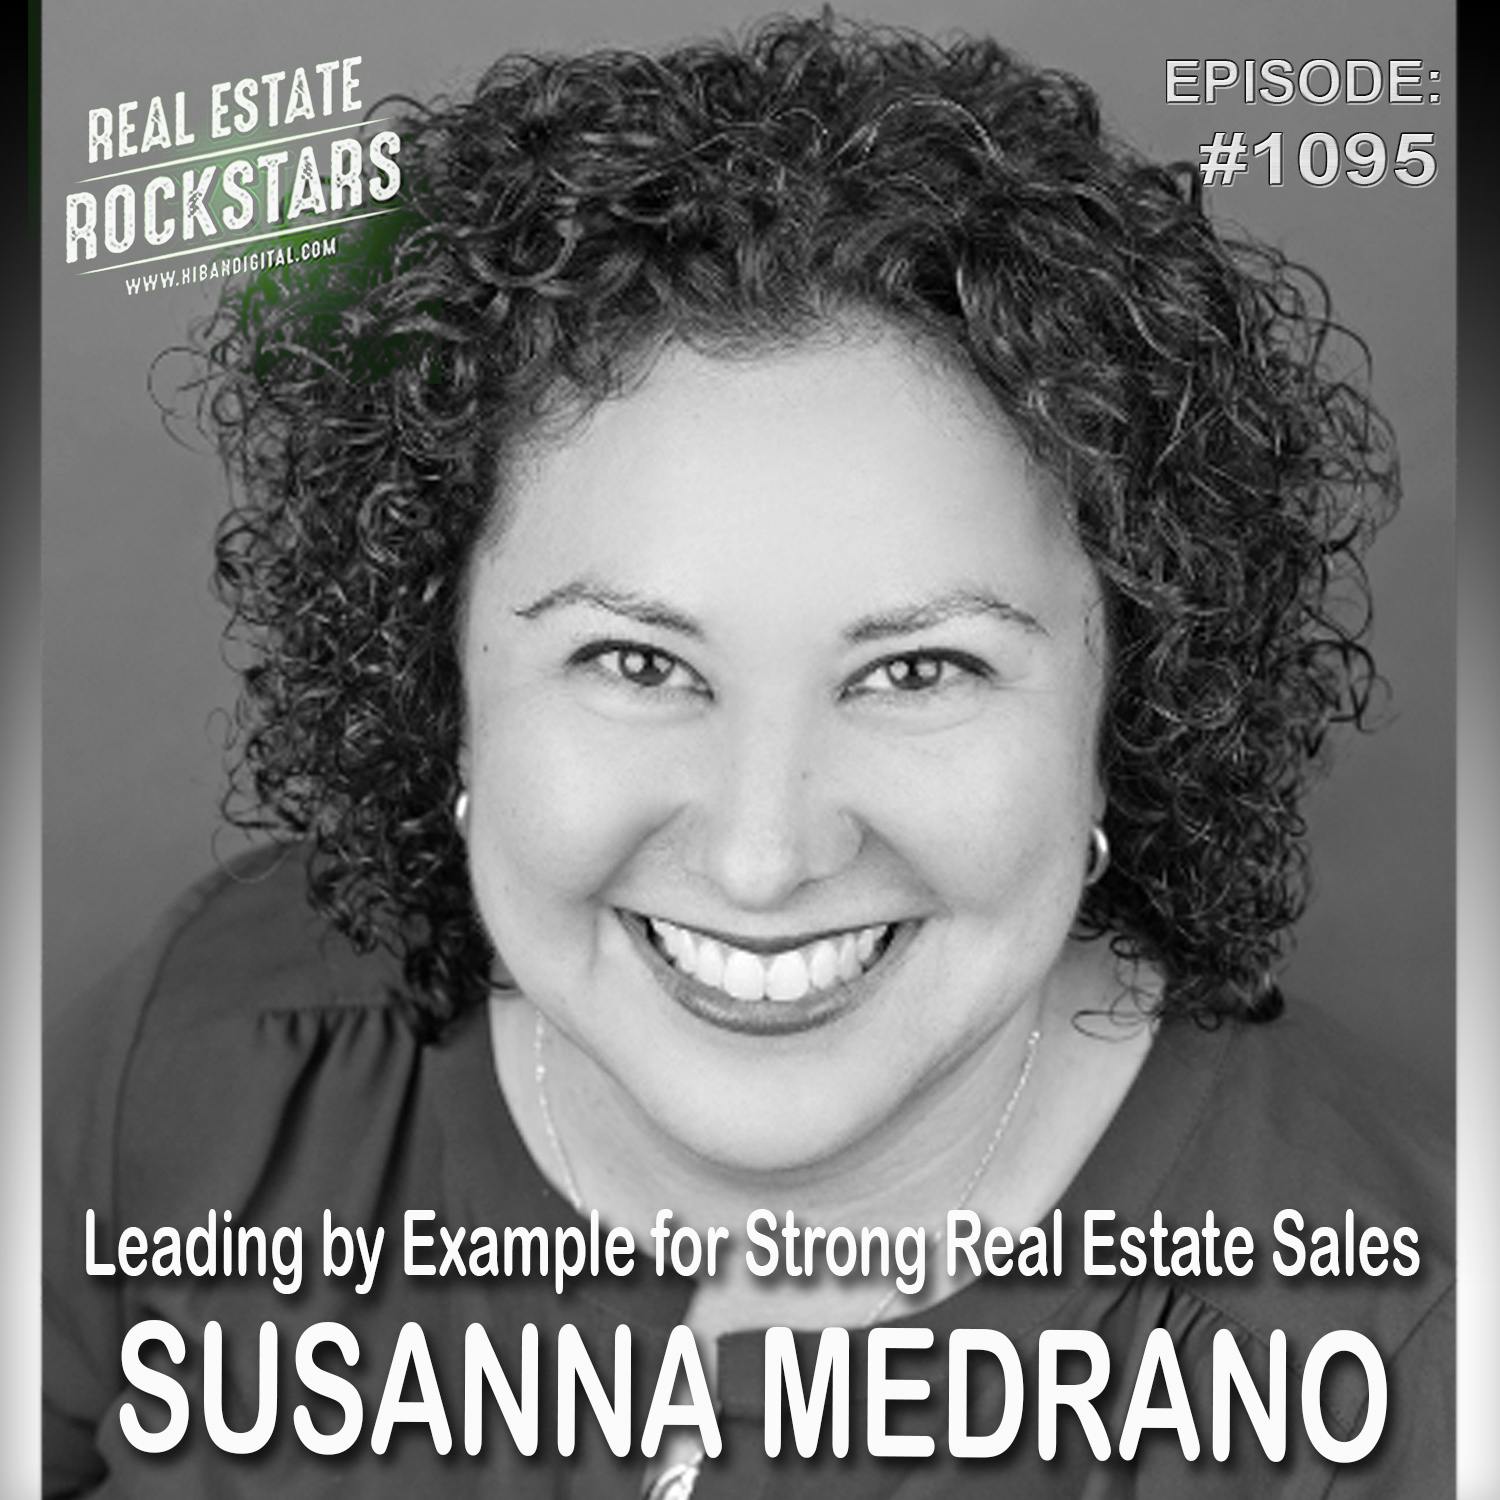 1095: Leading by Example for Strong Real Estate Sales – Susanna Medrano